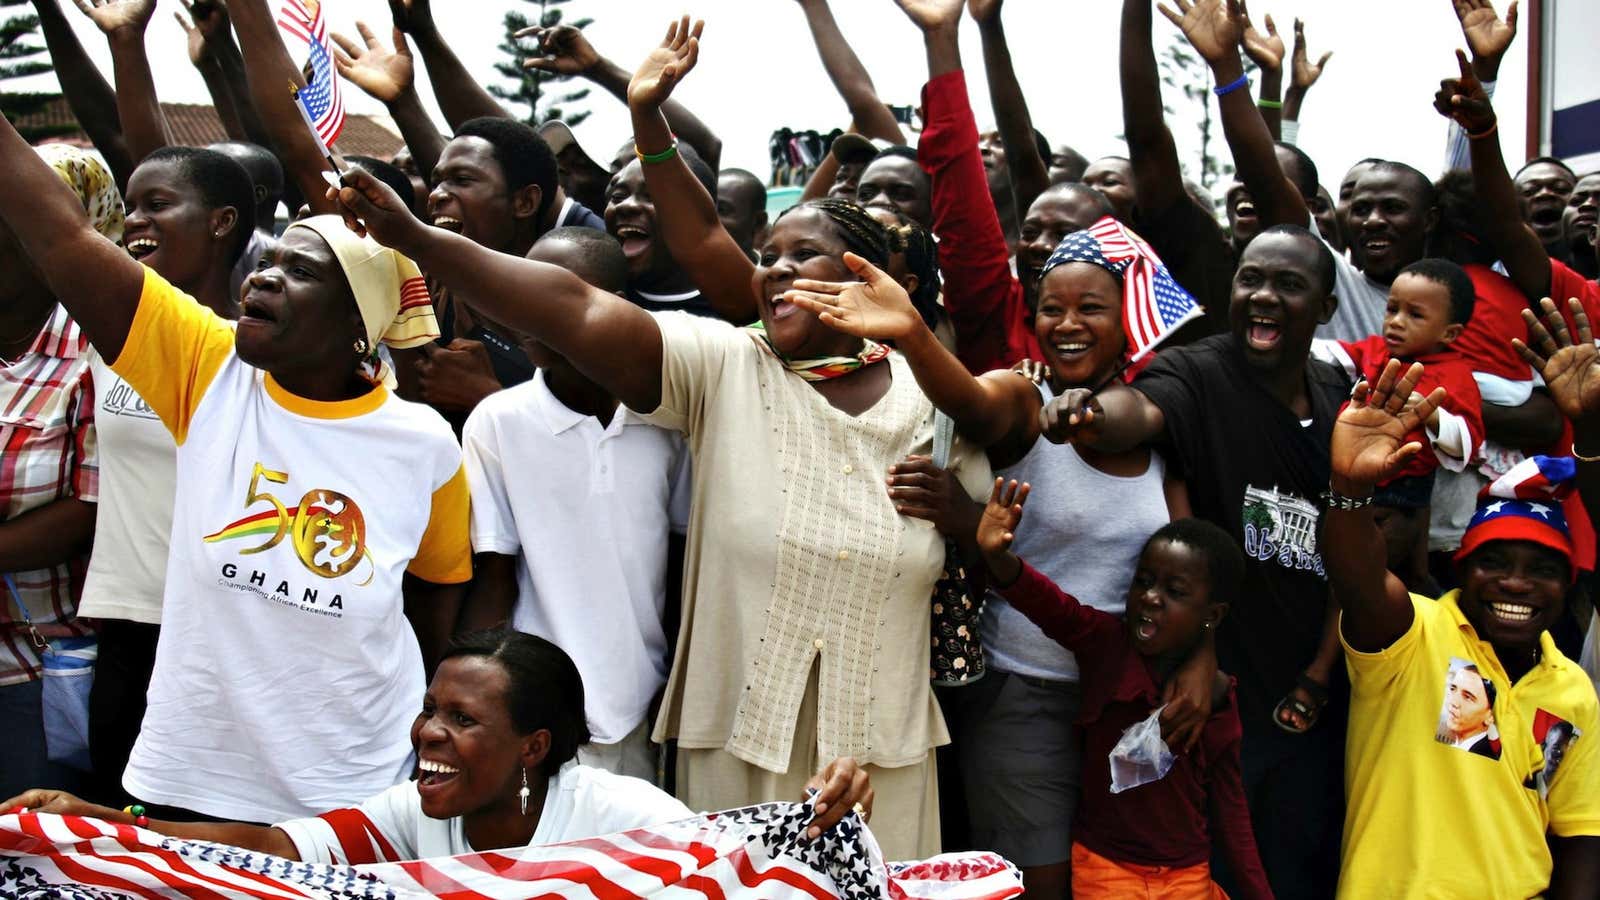 Ghanaians cheer during US president Barack Obama’s visit to Accra in 2009.